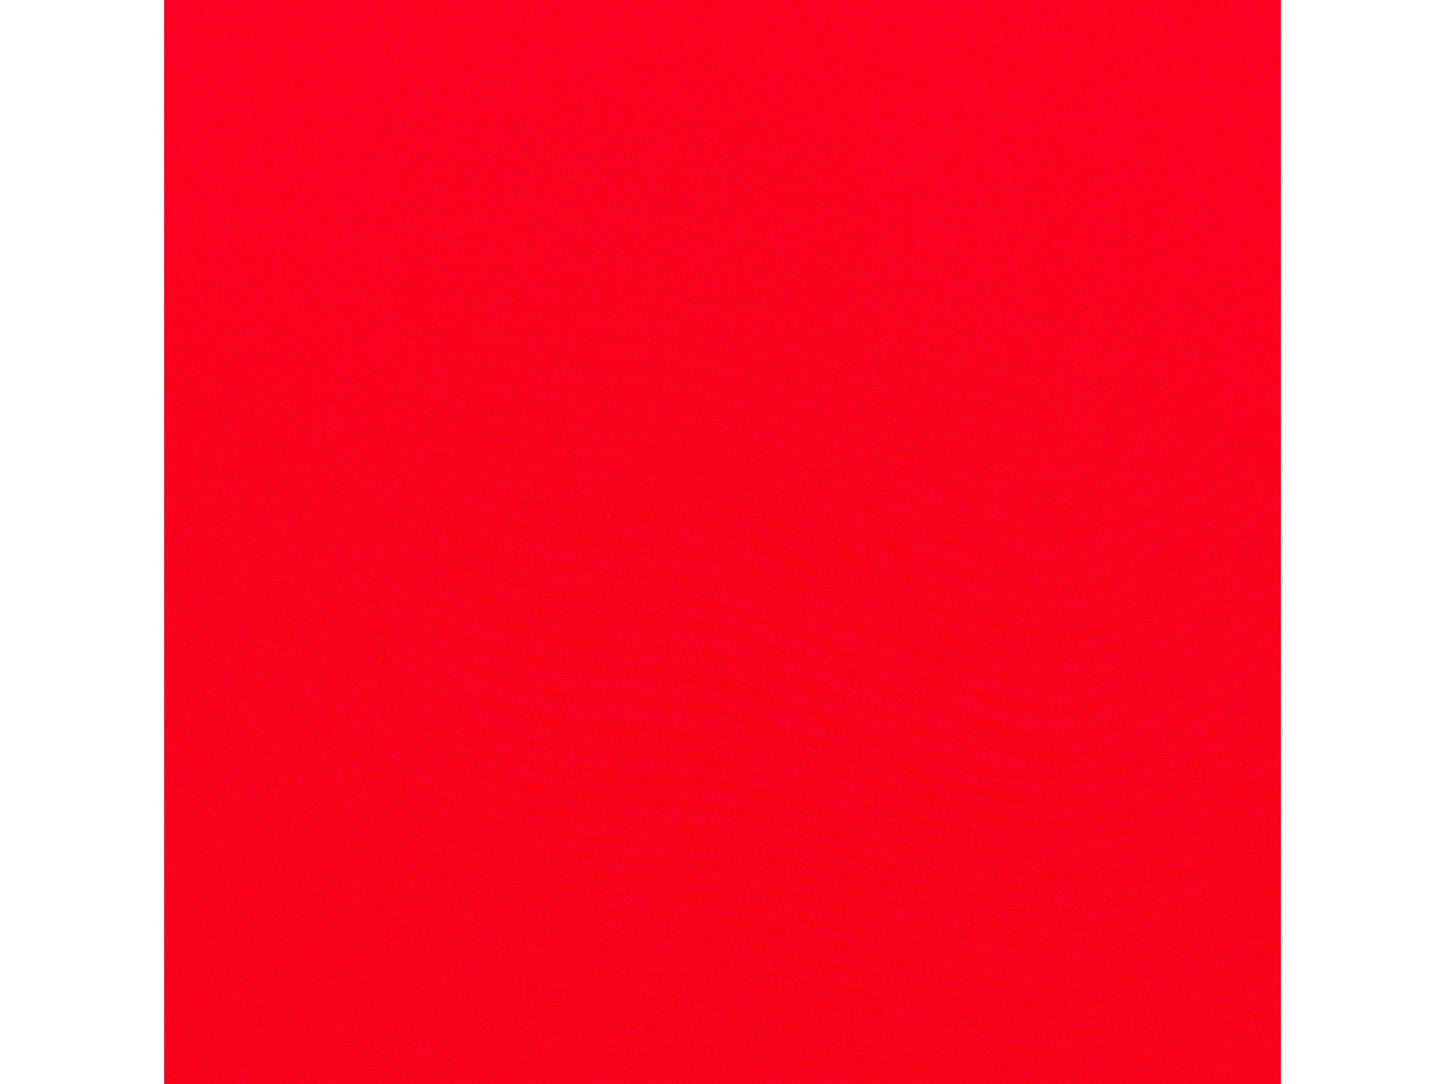 #color_red